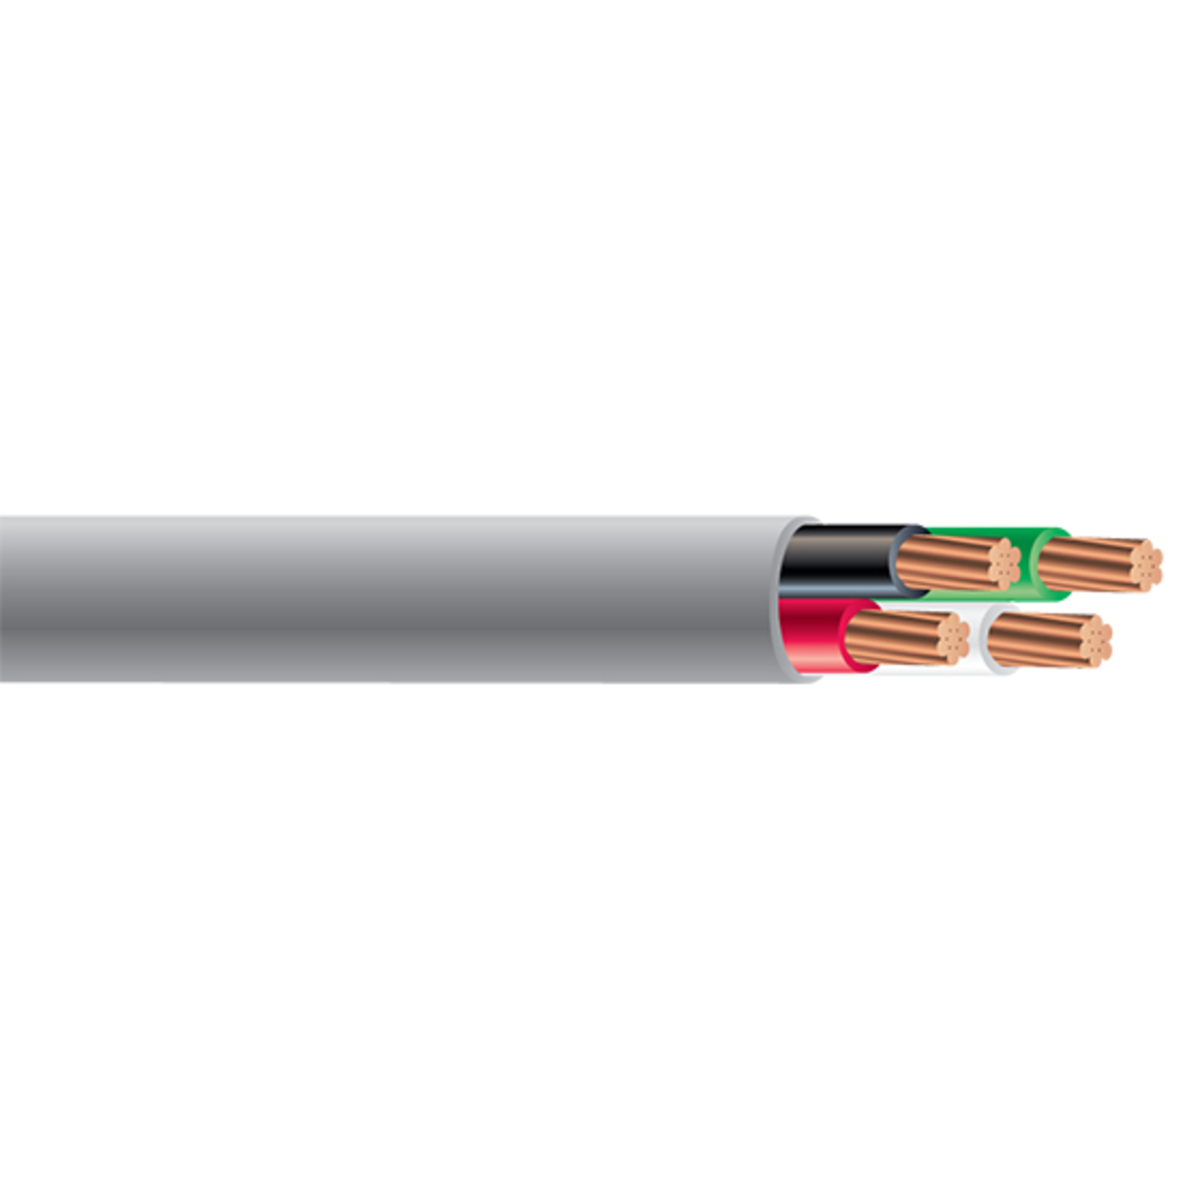 TEL224 - 22/4C Phone Cable - Cables & Cords